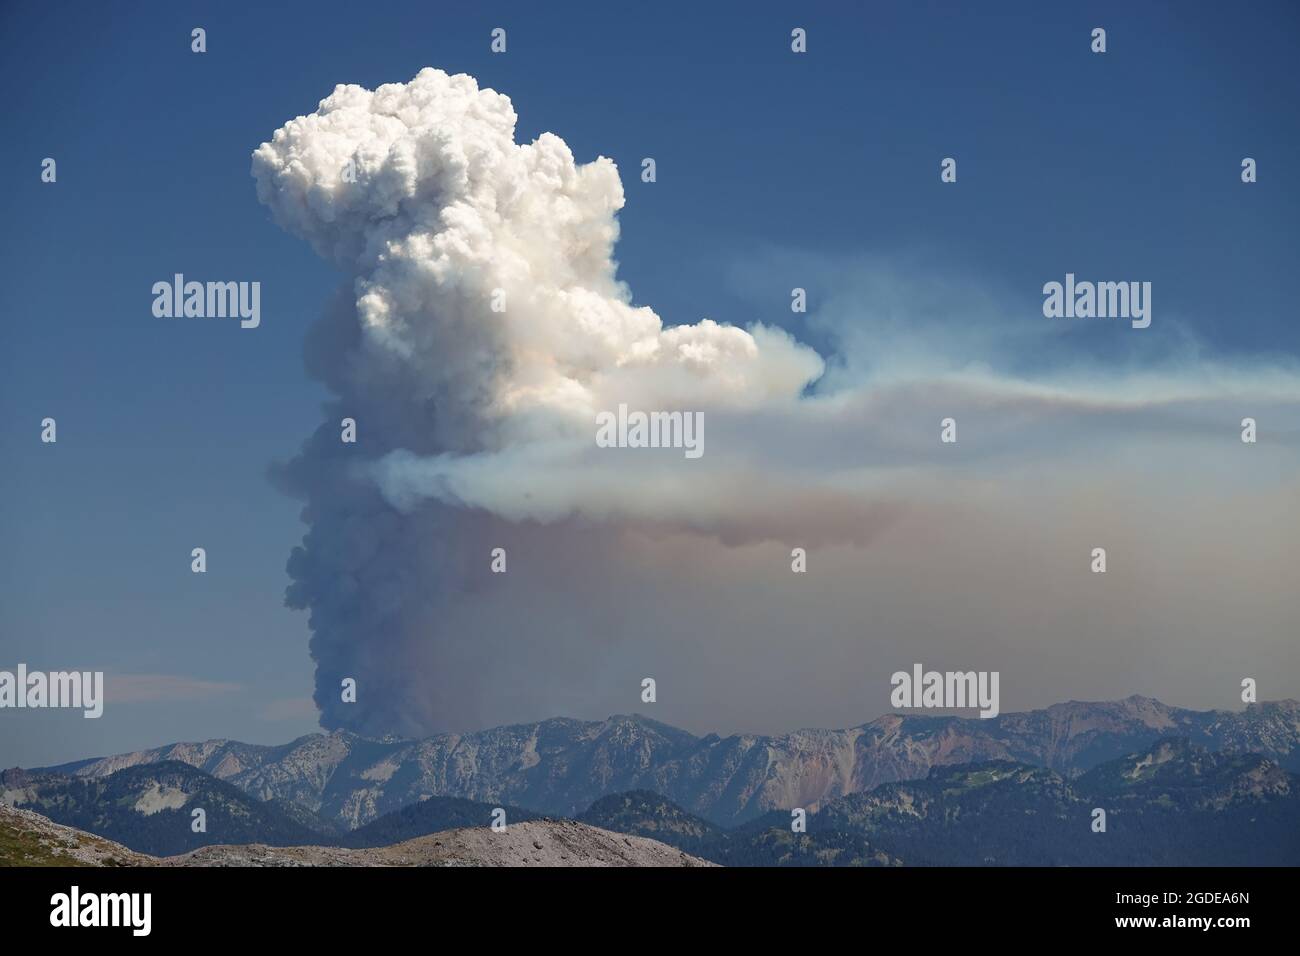 Flammagenitus (pyrocumulus) cloud from Schneider Springs wildfire in Washington state, USA, August 2021 Stock Photo